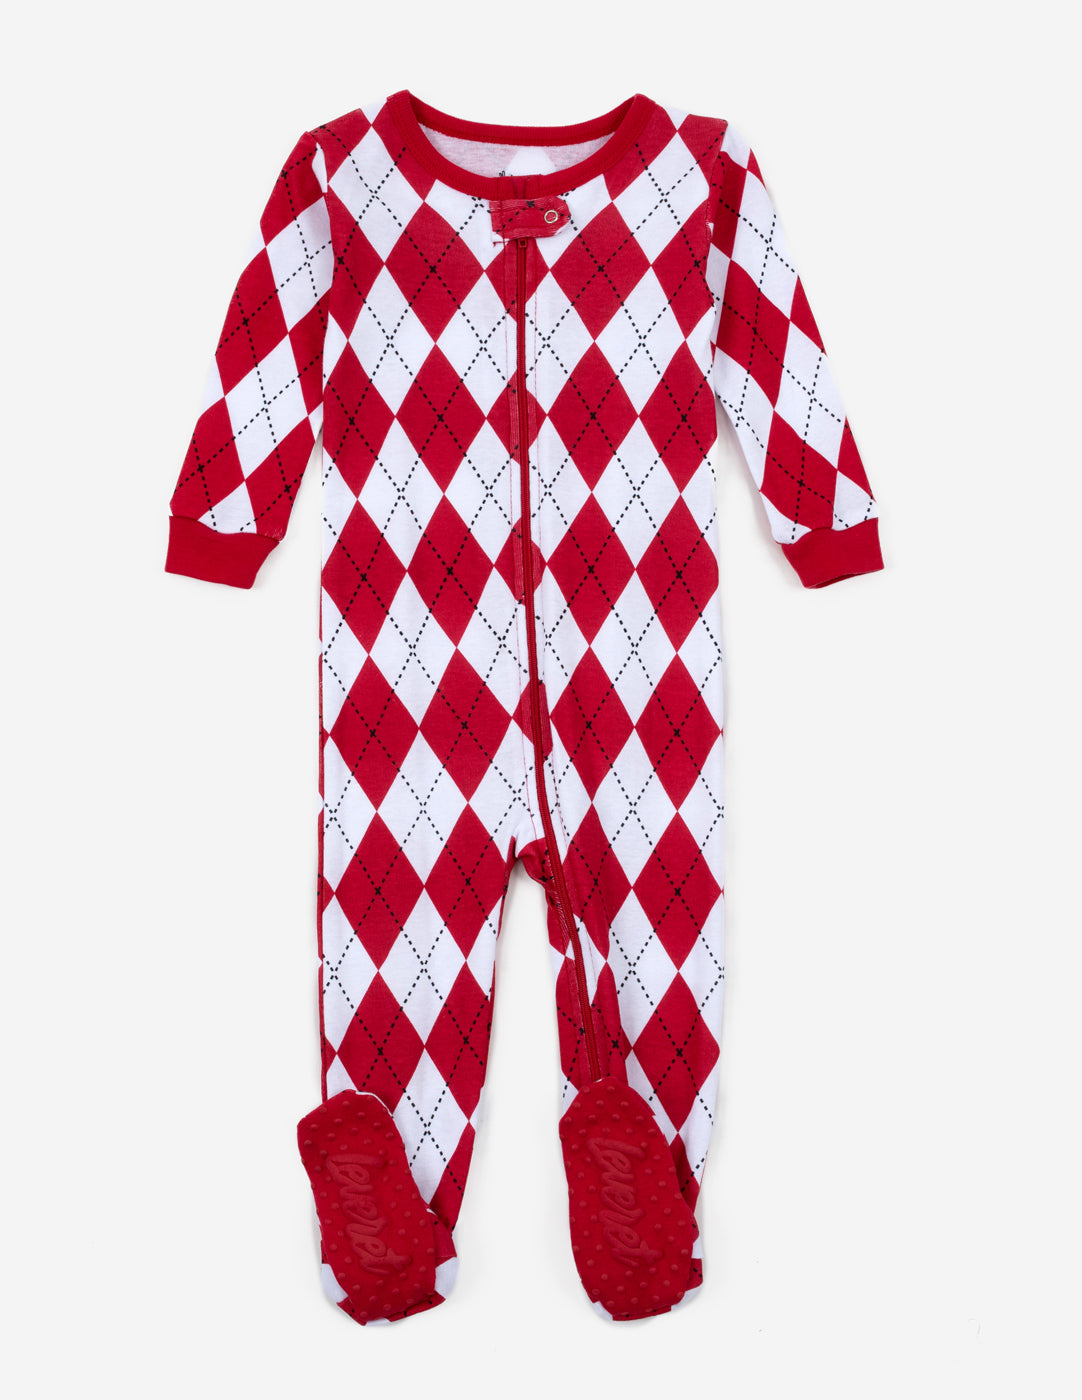 red and white argyle footed baby pajamas